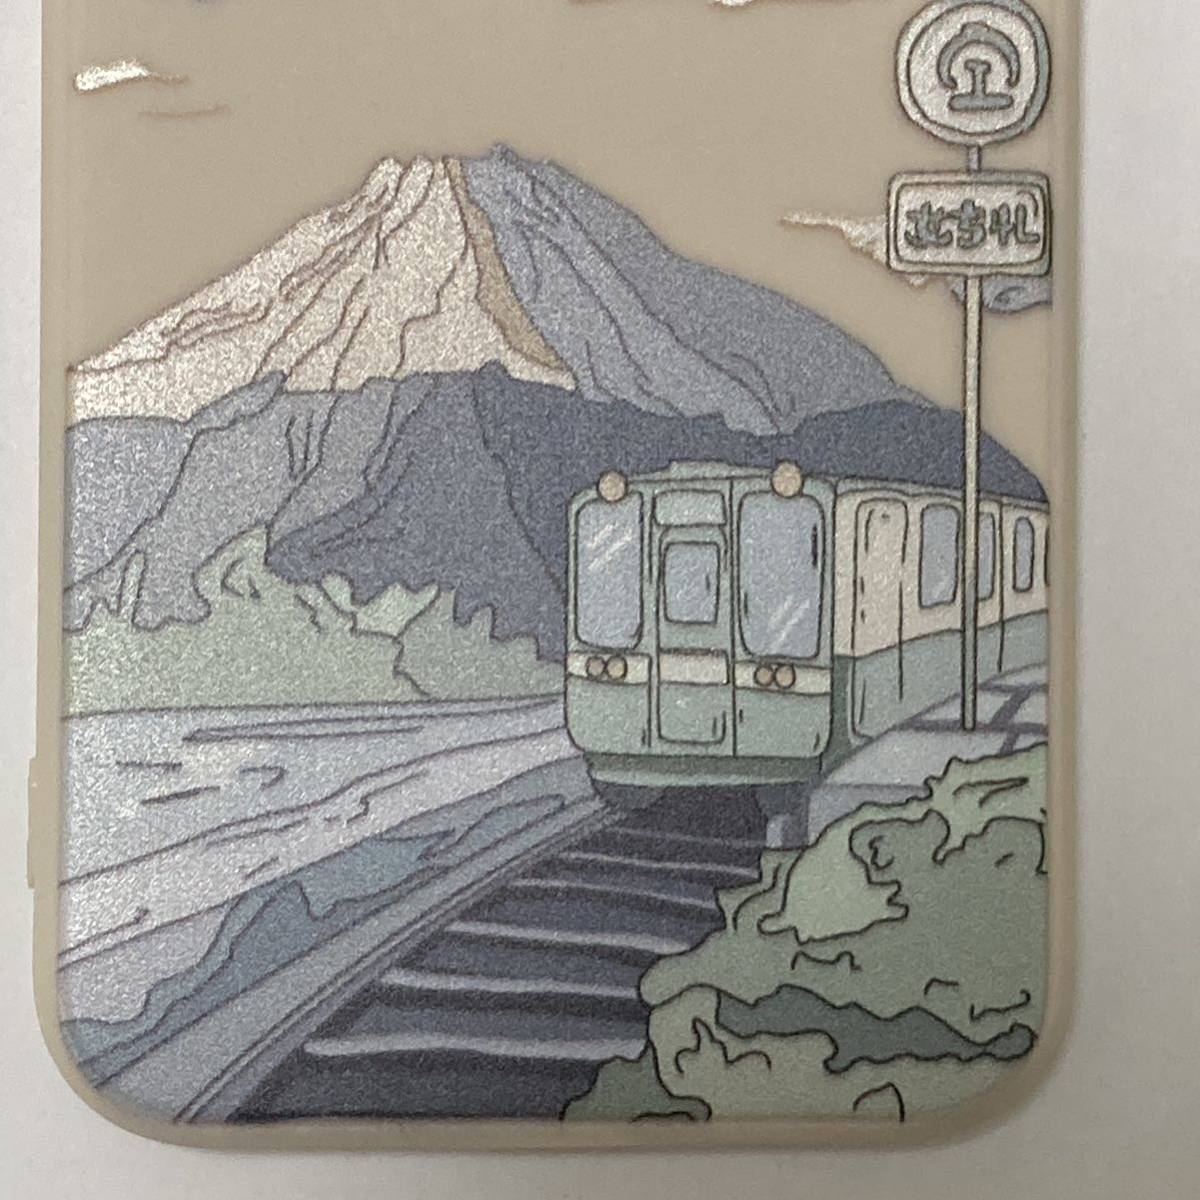  new goods iphone case 7/8/SE2.3 for landscape painting manner train smartphone case scenery beautiful ... rice field . silicon case Mt Fuji manner Japanese picture manner picture Japan 